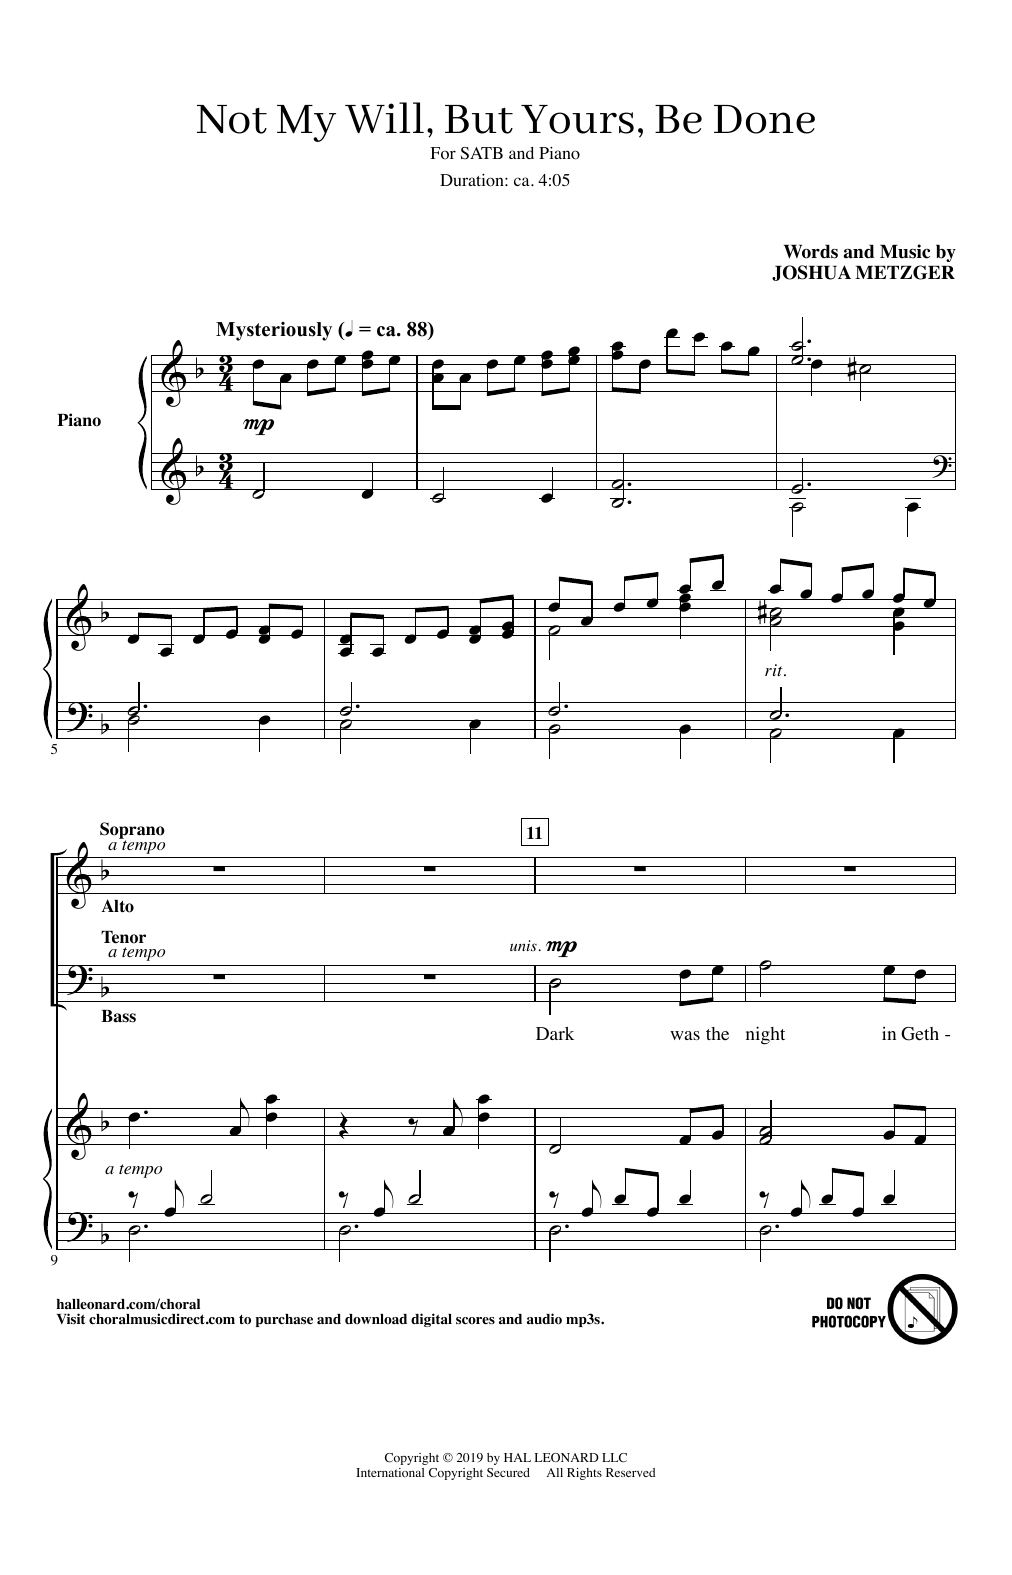 Not My Will, But Yours, Be Done (SATB Choir) von Joshua Metzger